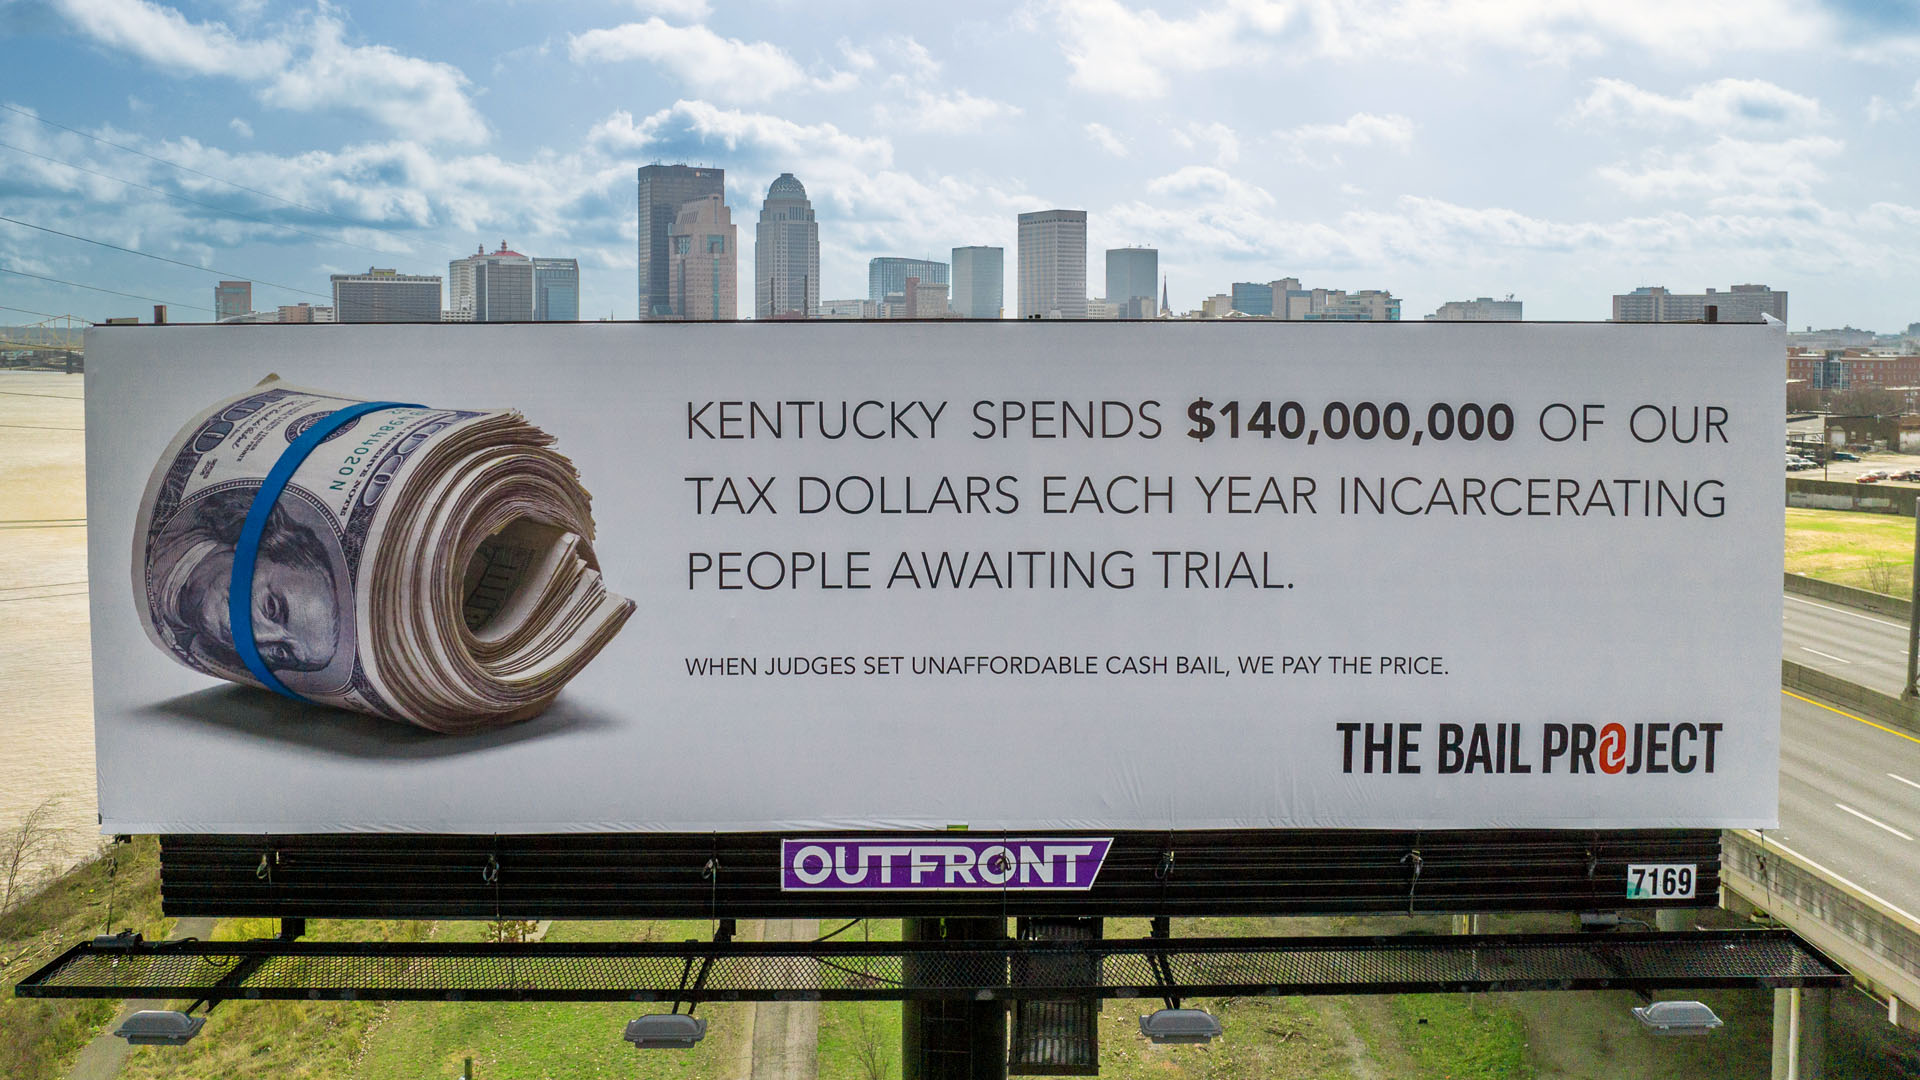 A Bail Project billboard in Kentucky featuring a roll of money, reading "Kentucky spends $140,000,000 of our tax dollars each year incarcerating people awaiting trial. When judges set unaffordable cash bail, we pay the price".